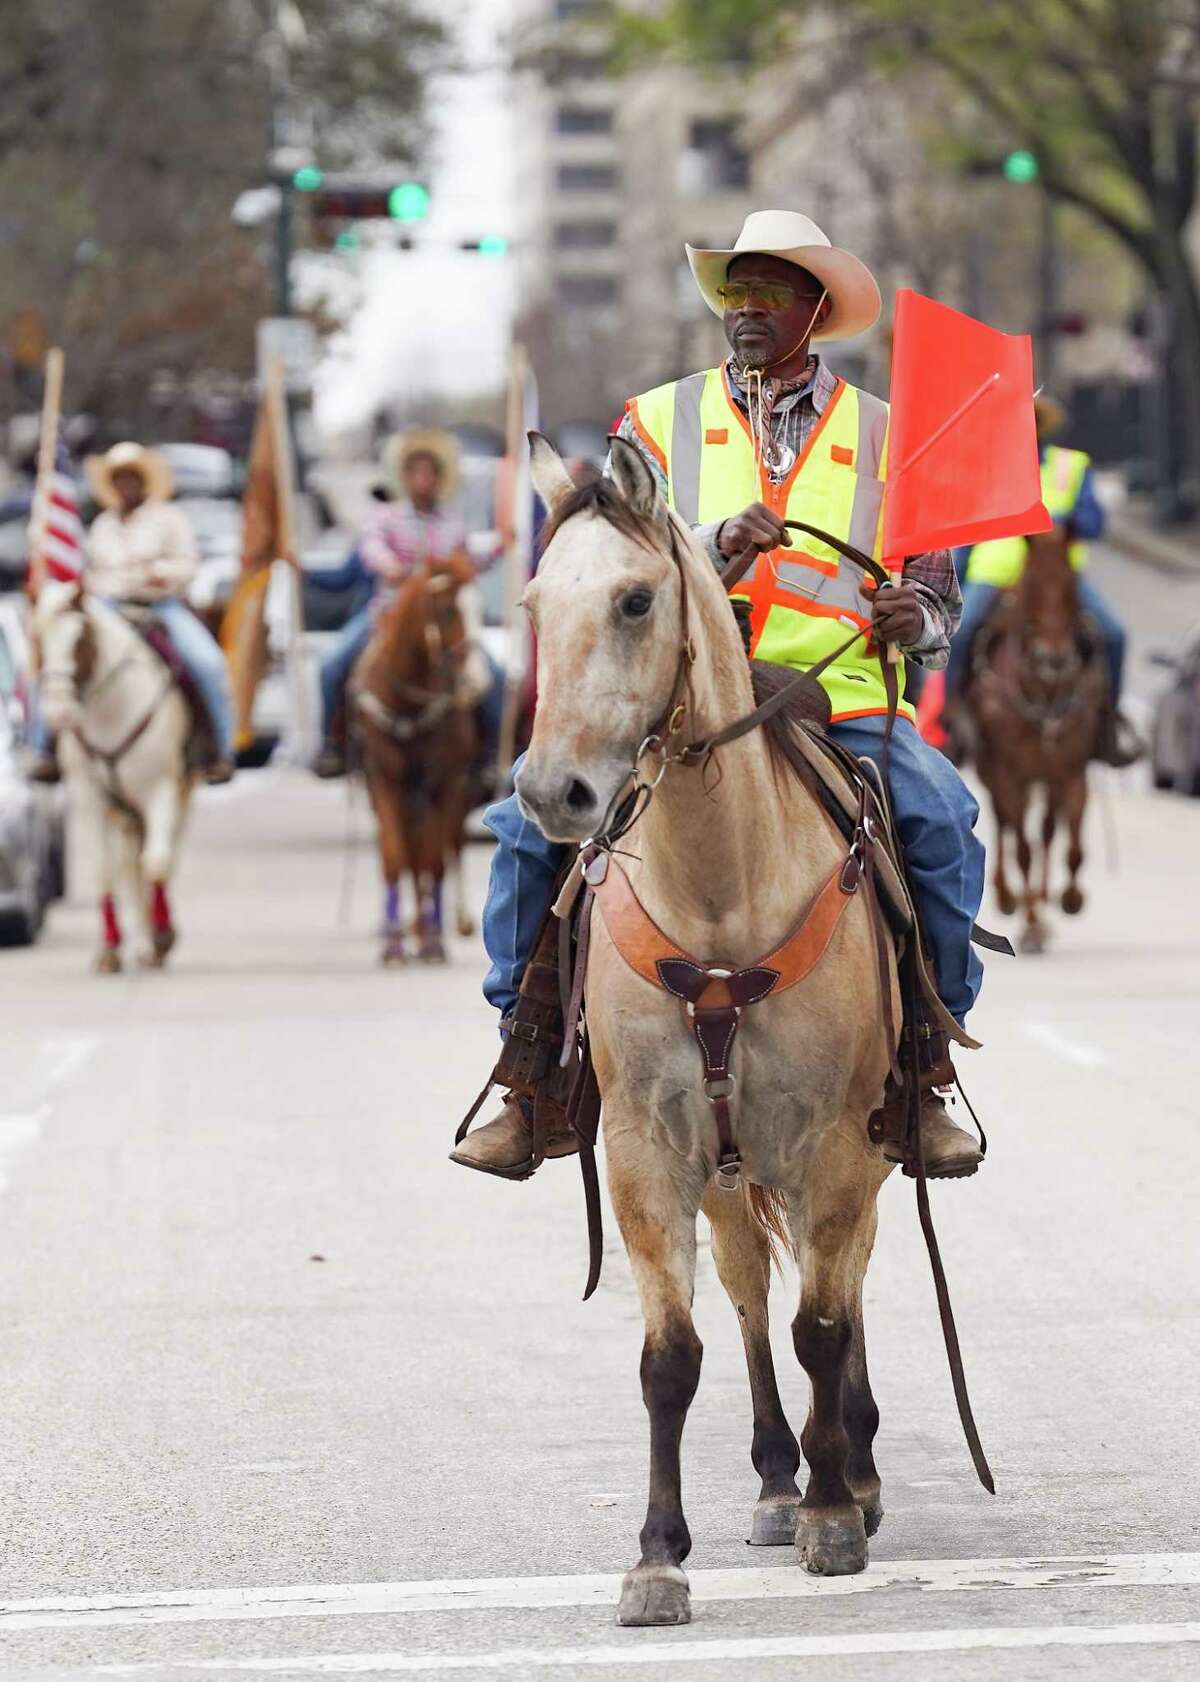 2023 Houston rodeo parade: Route, map and more for season kickoff